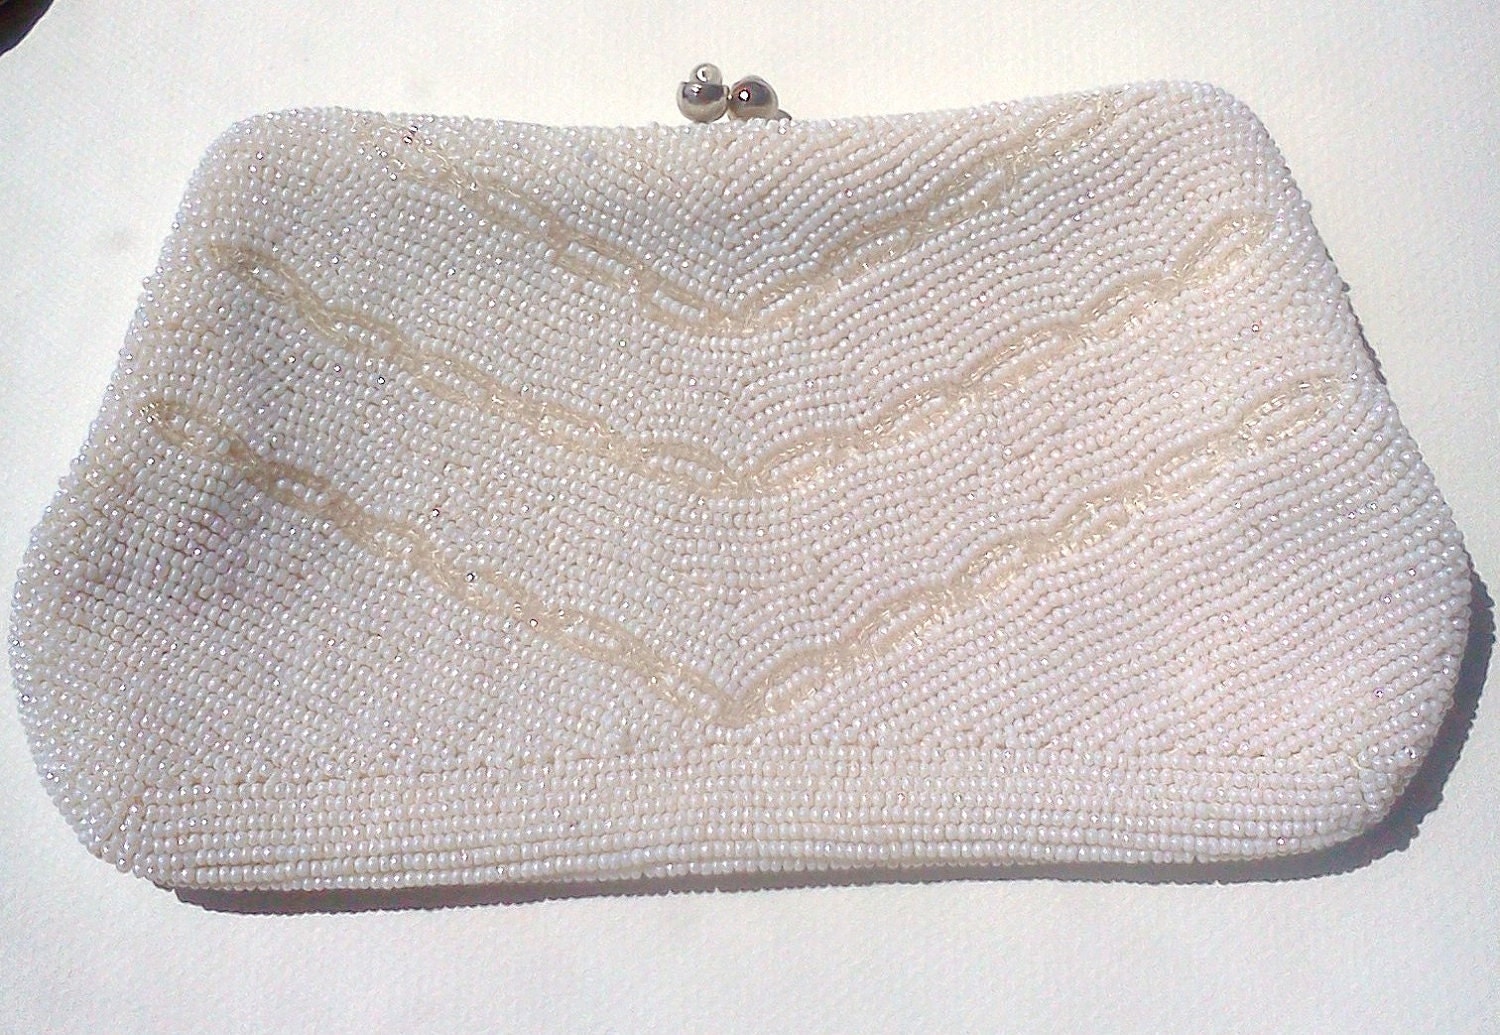 Vintage white beaded clutch evening bag by WeeLambieVintage